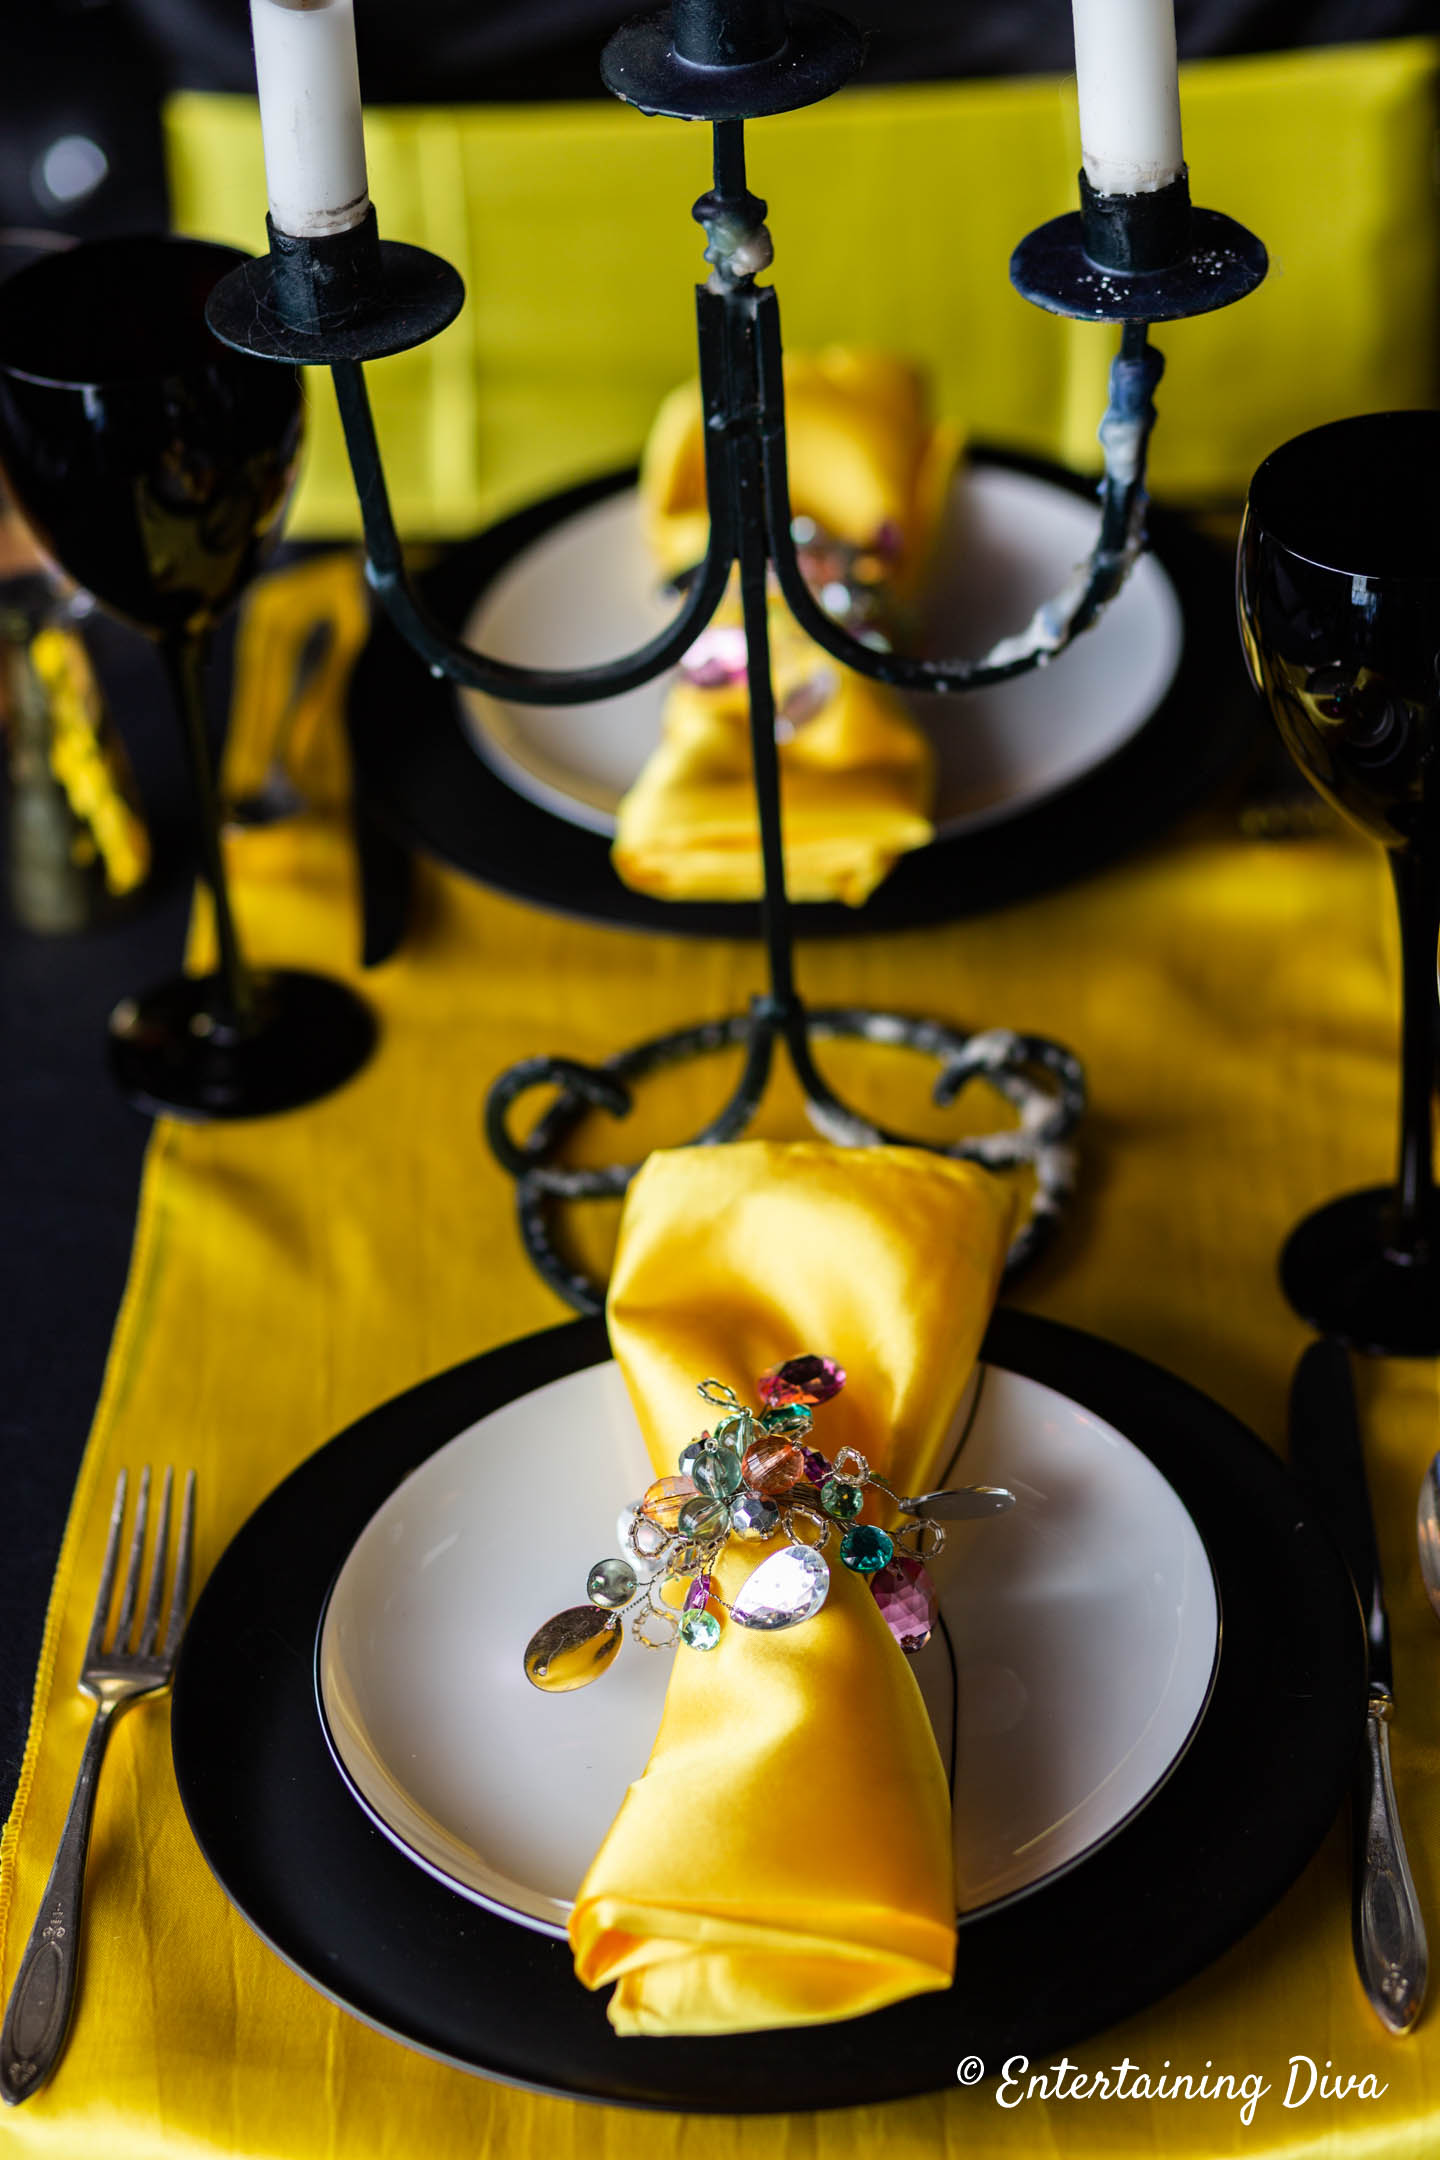 Hufflepuff House place setting with a yellow napkin and table runner and black and white plates